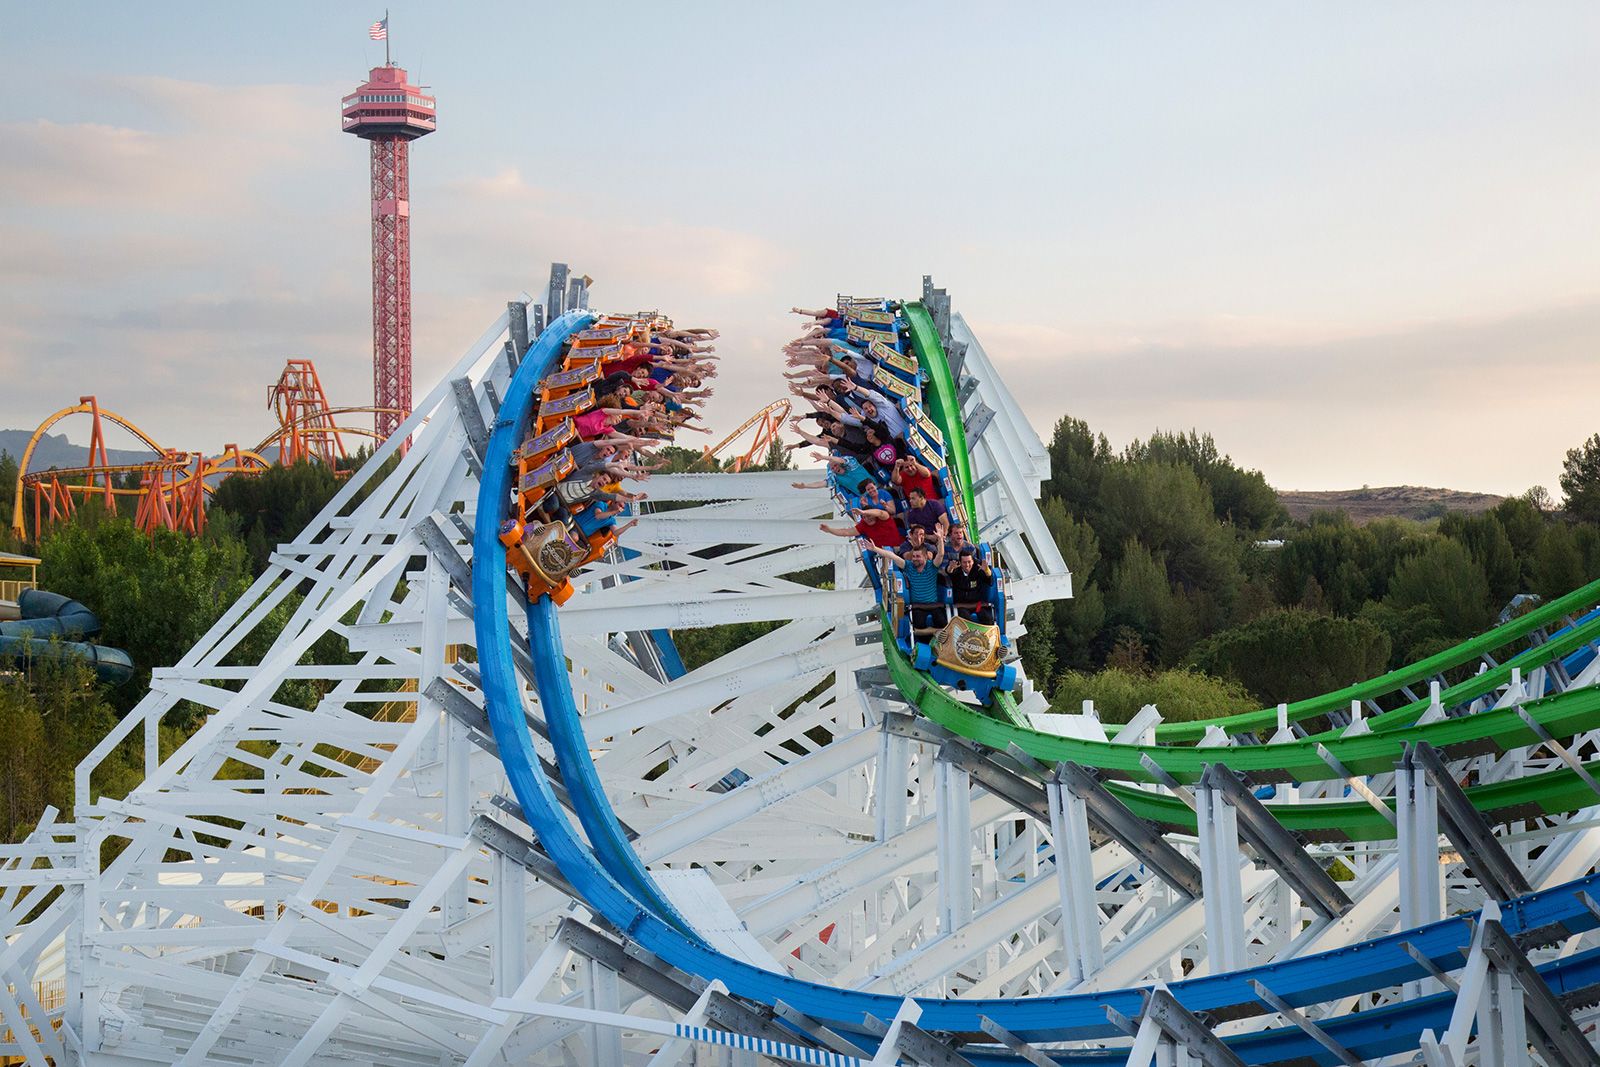 State of the Arts: A New Kind of Wooden Coaster Twists and Turns